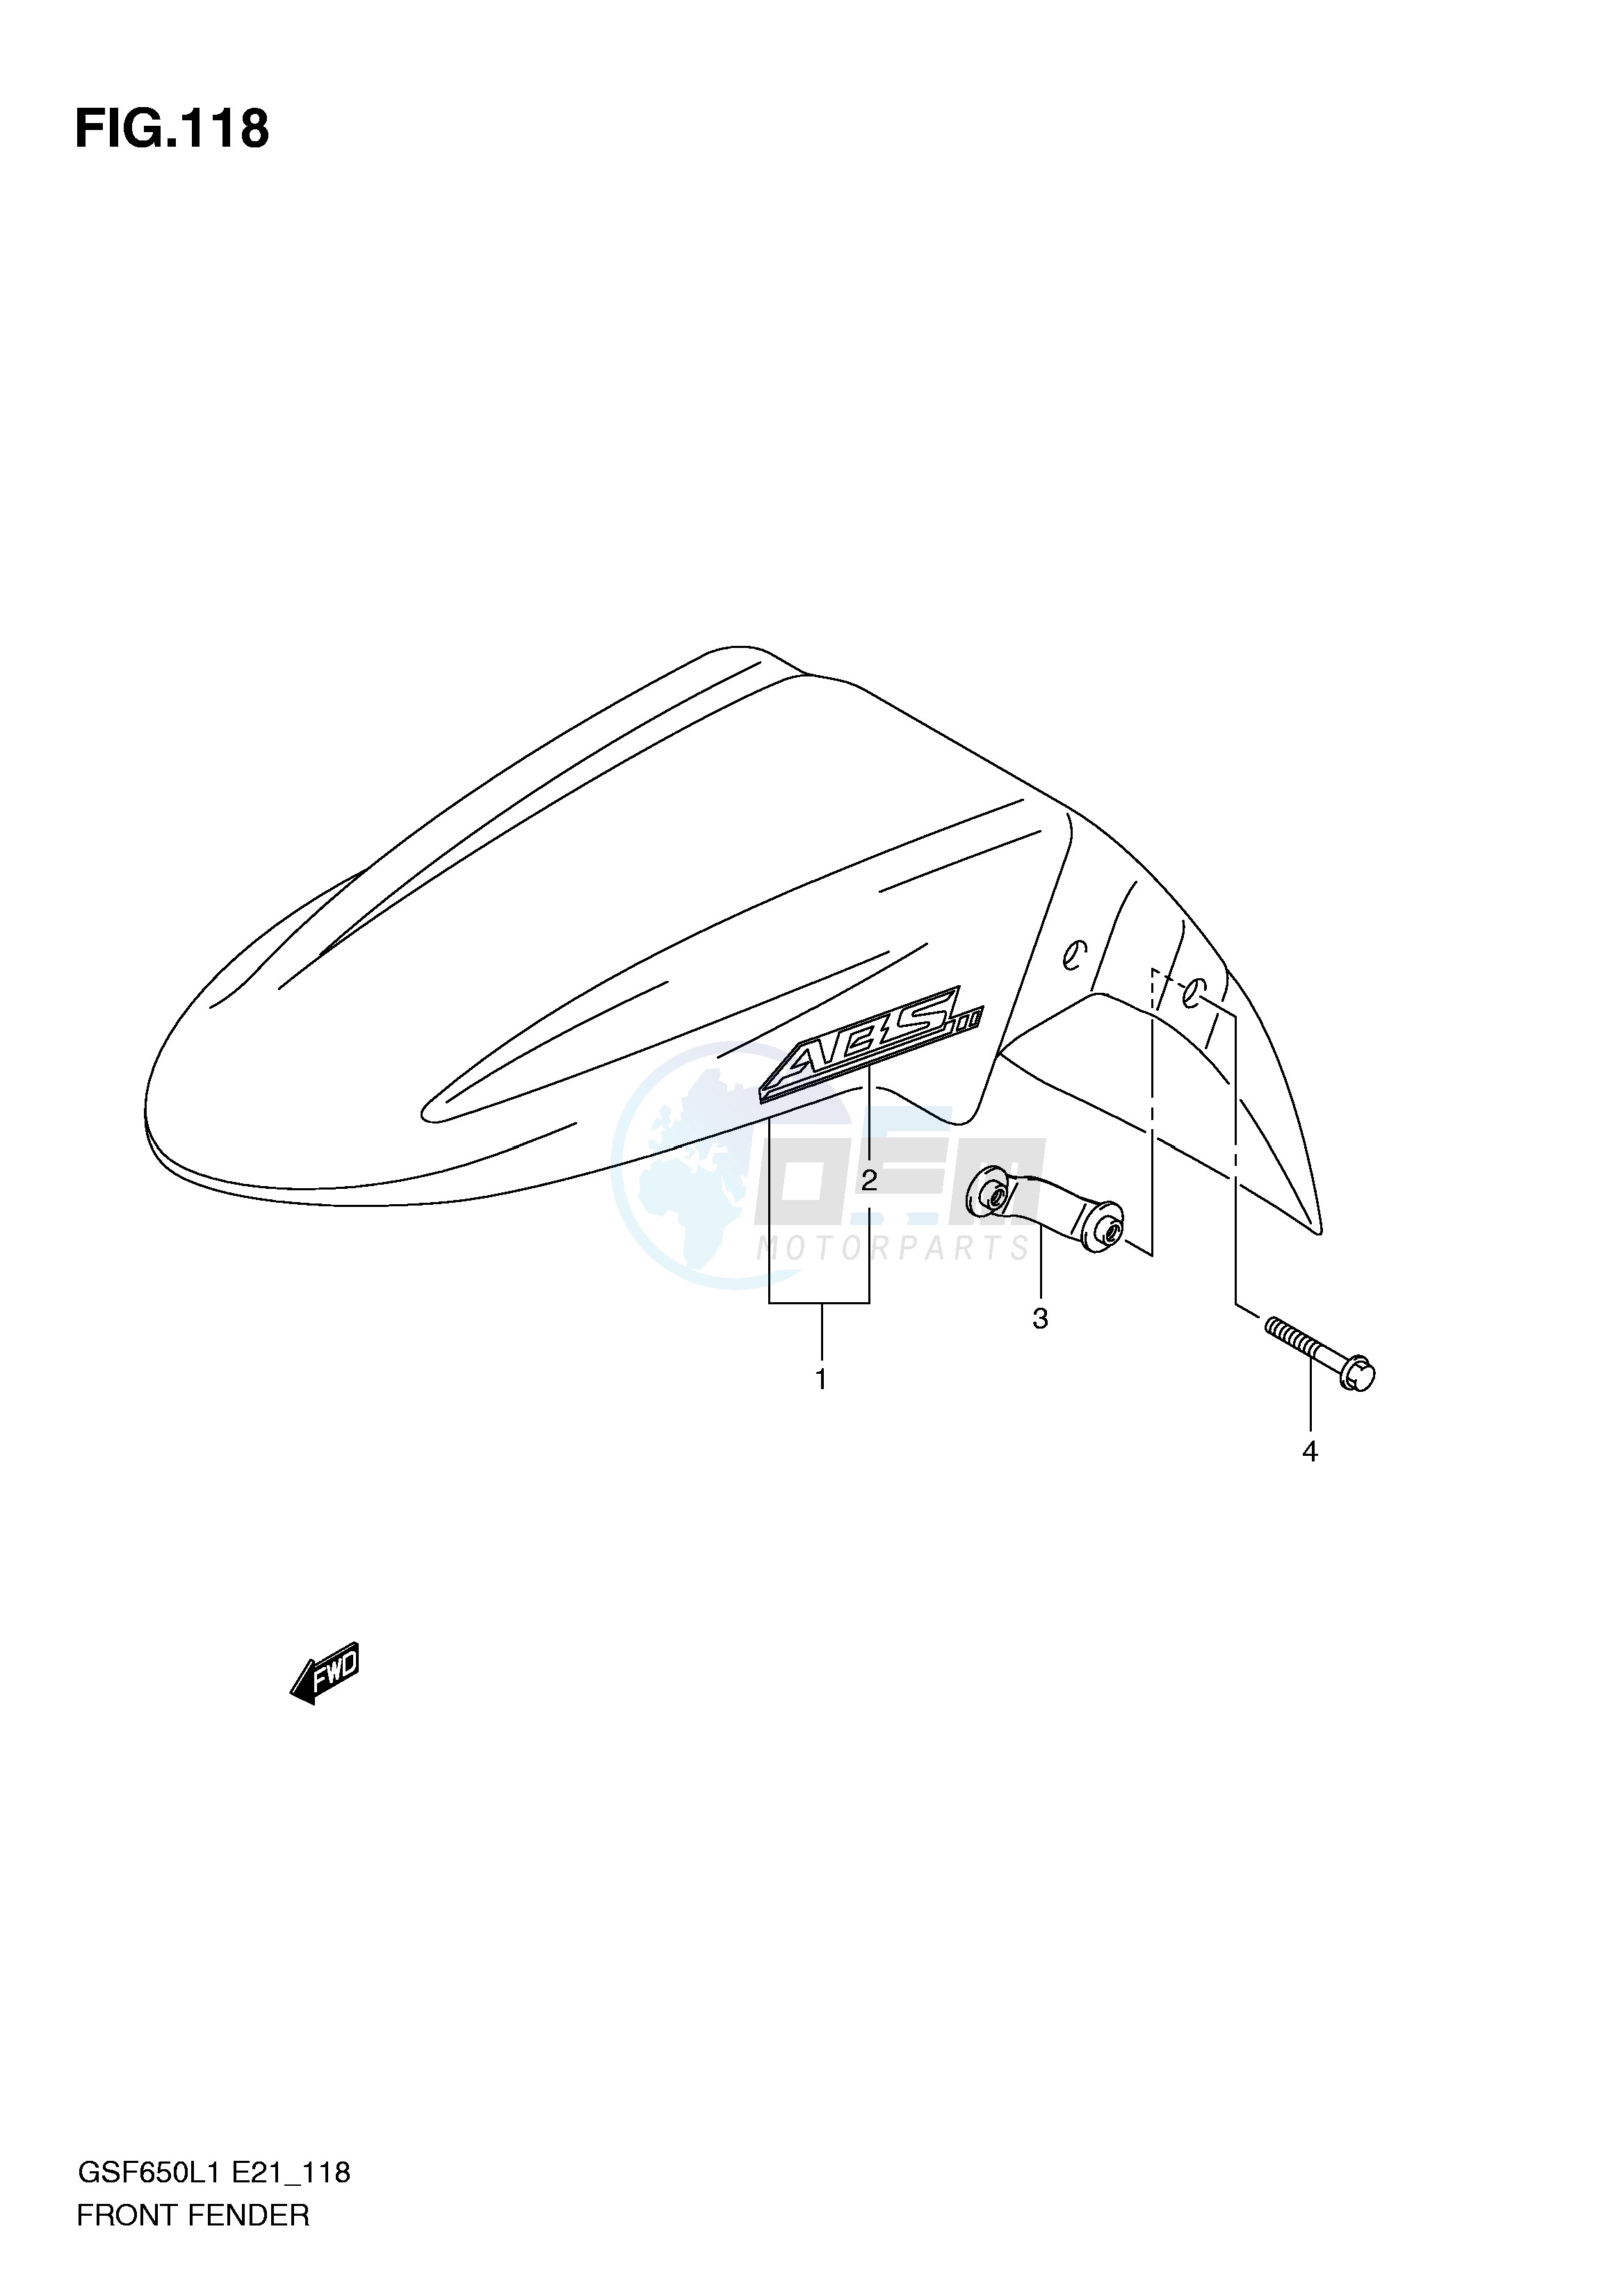 FRONT FENDER (GSF650SUAL1 E21) blueprint